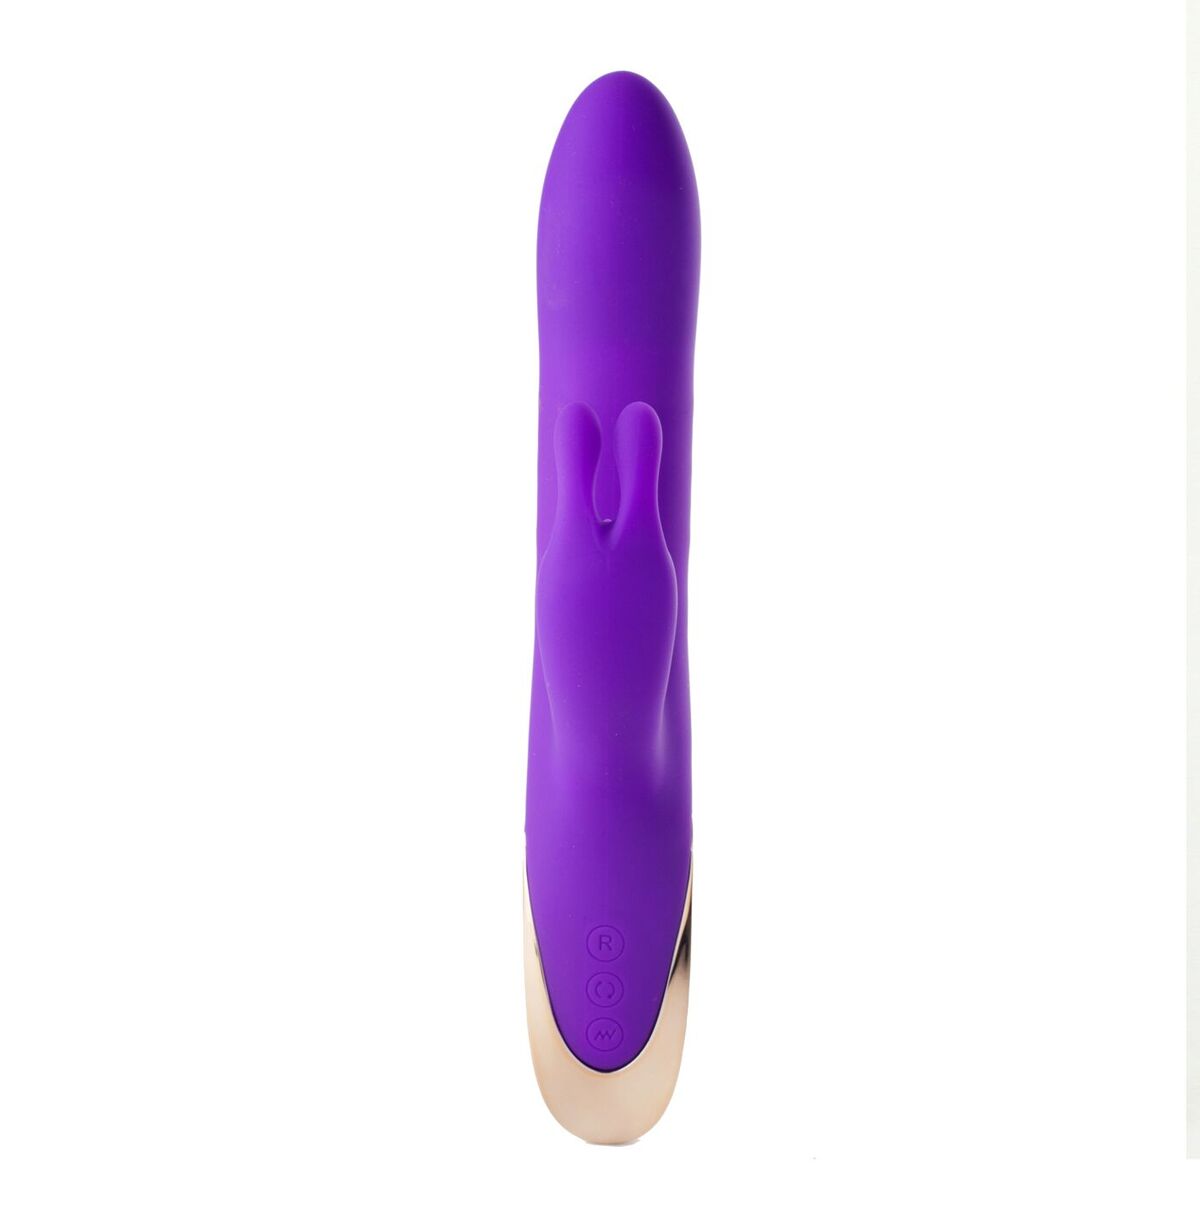 KARLIN SUPERCHARGED SILICONE RABBIT RECHARGEABLE PURPLE